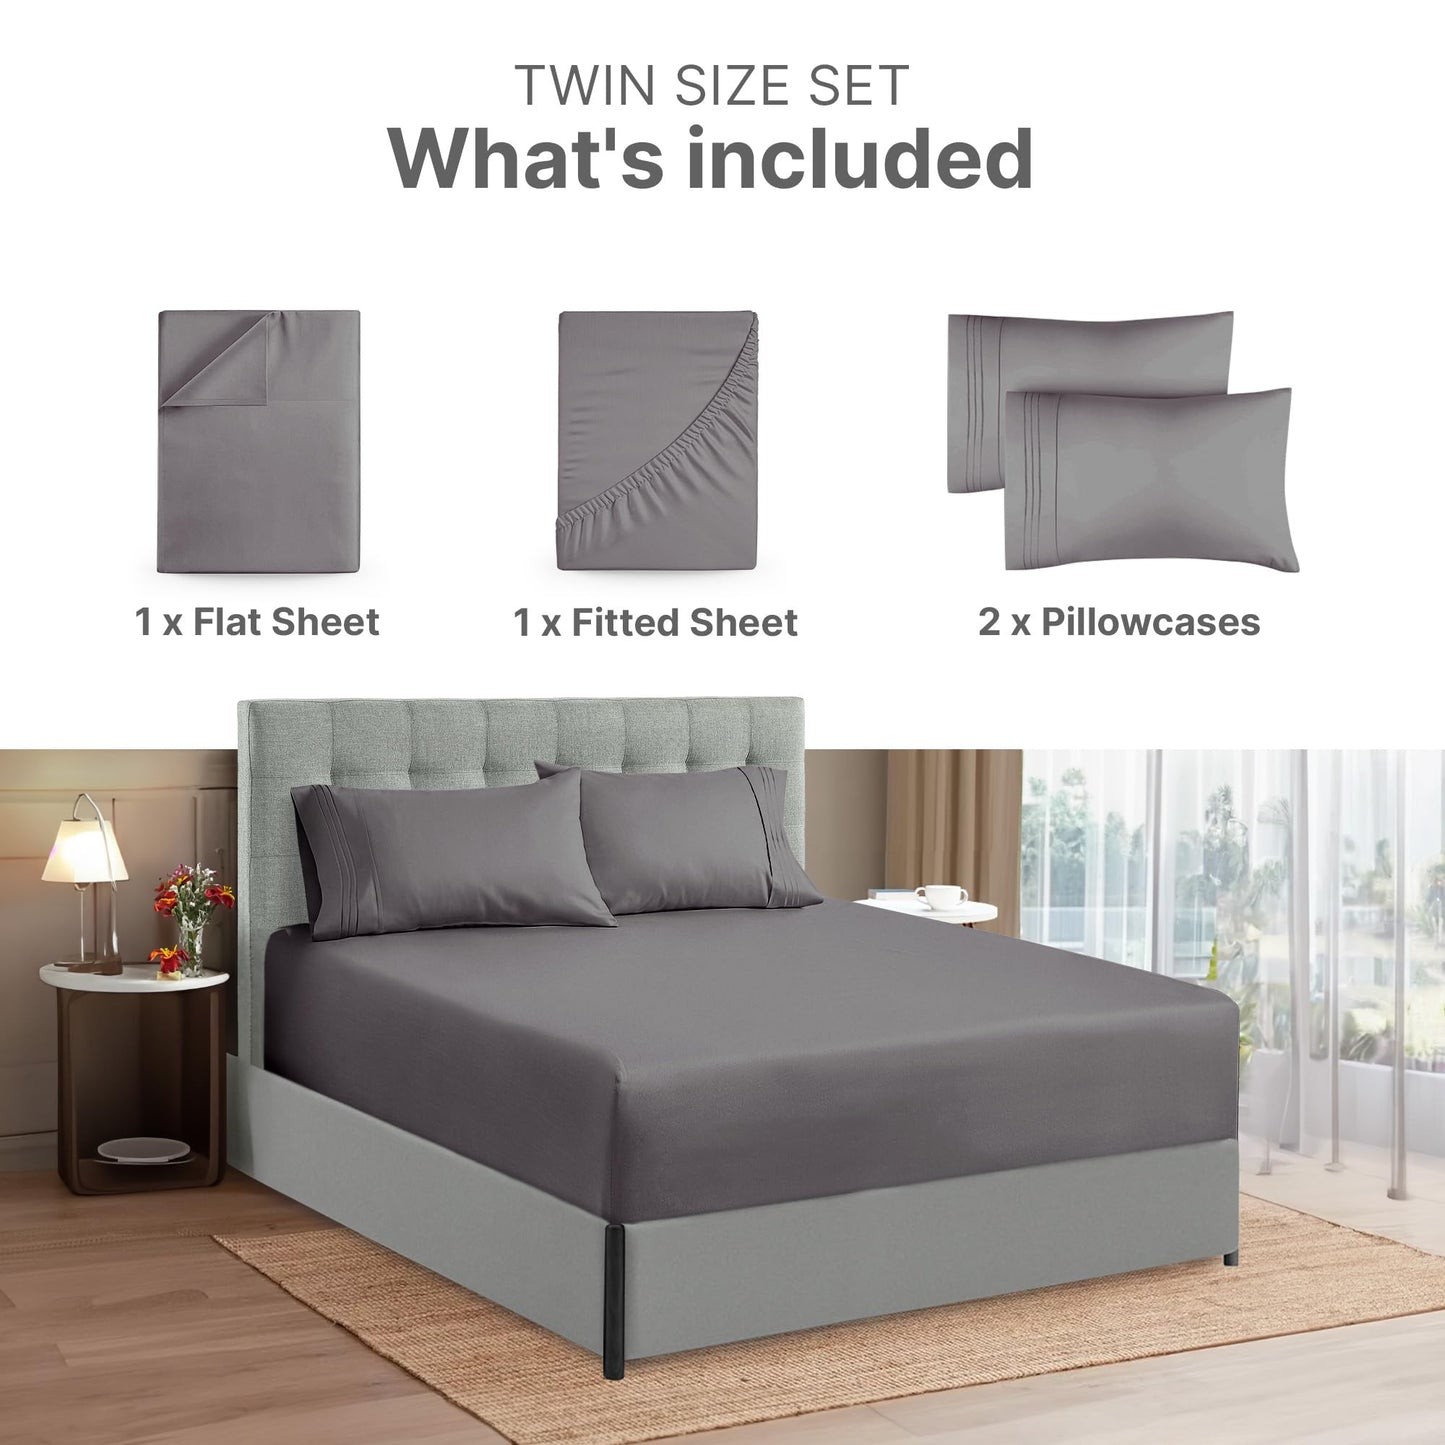 Extra Deep Twin XL Sheet Set - 4 Piece Breathable & Cooling Sheets - Hotel Luxury Bed Sheets Set - Easy & Secure Fit - Soft, Wrinkle Free & Comfy Sheets Set - Grey Sheet Set w/Extra Deep Pockets